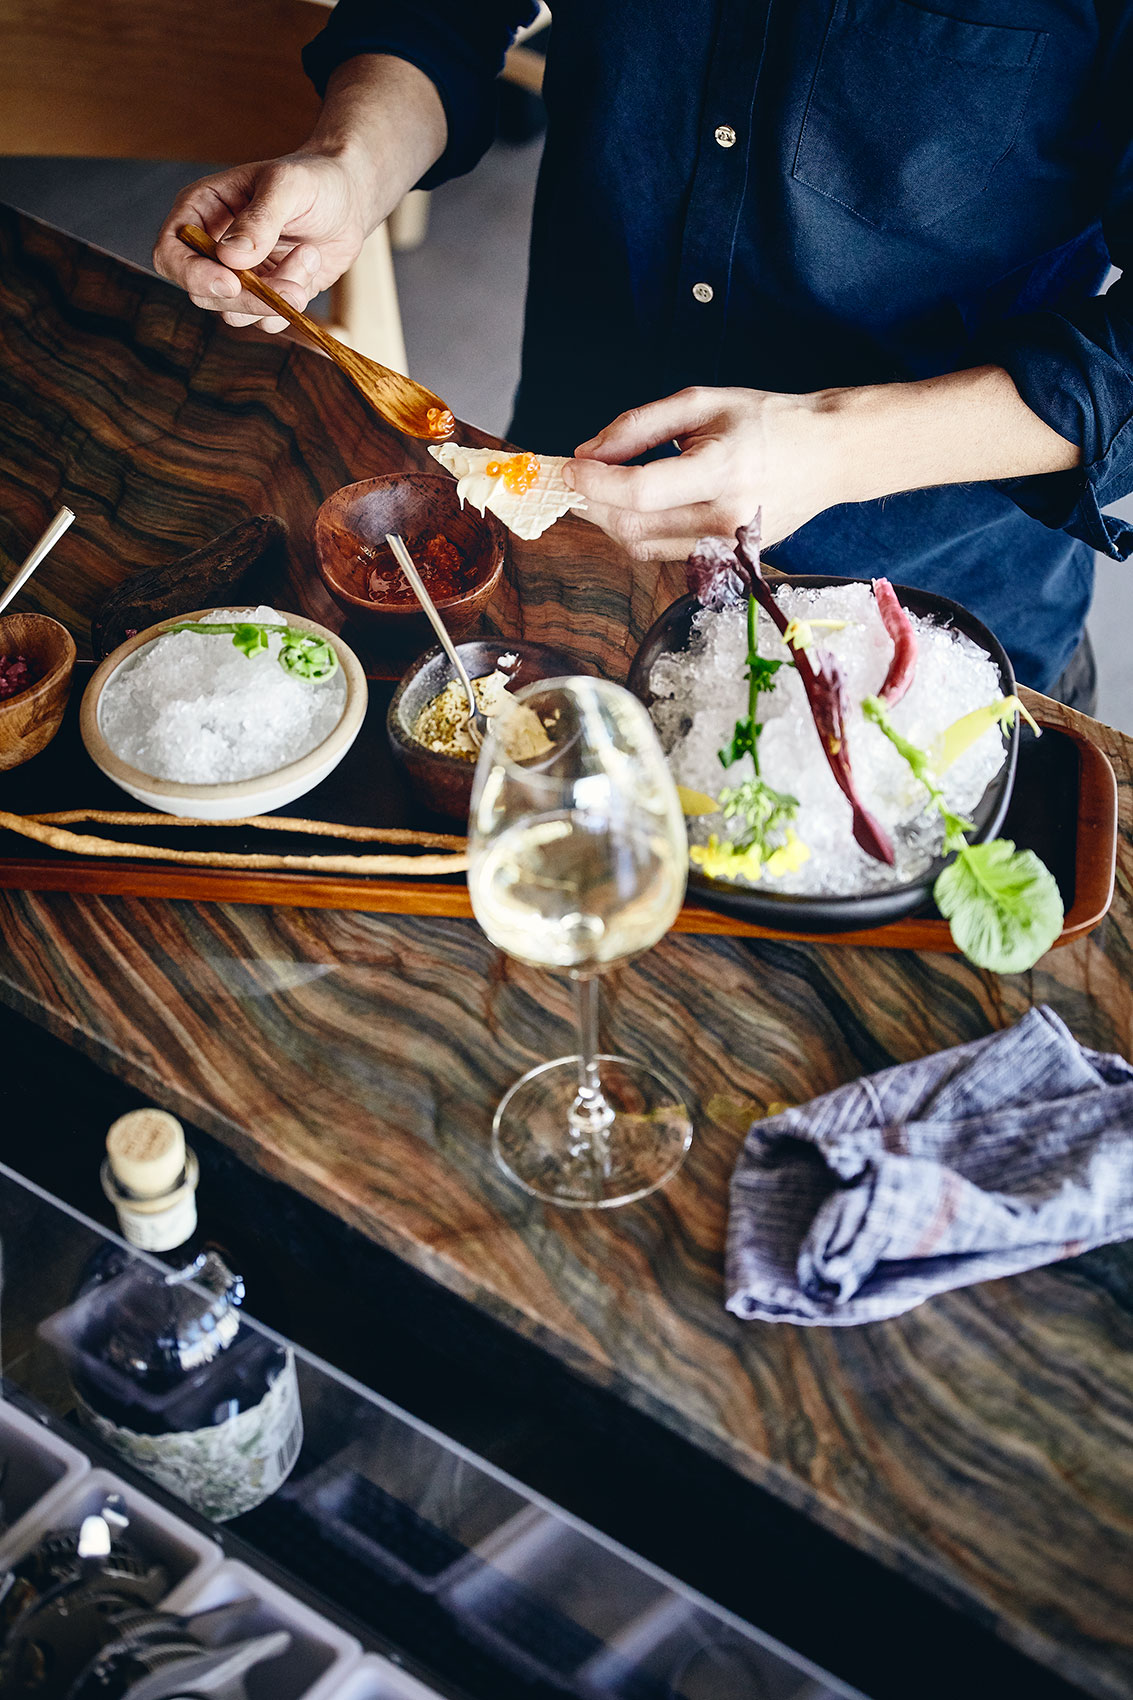 Ahi Dining at Bar Counter with White Wine • Hospitality & Culinary Food Photography